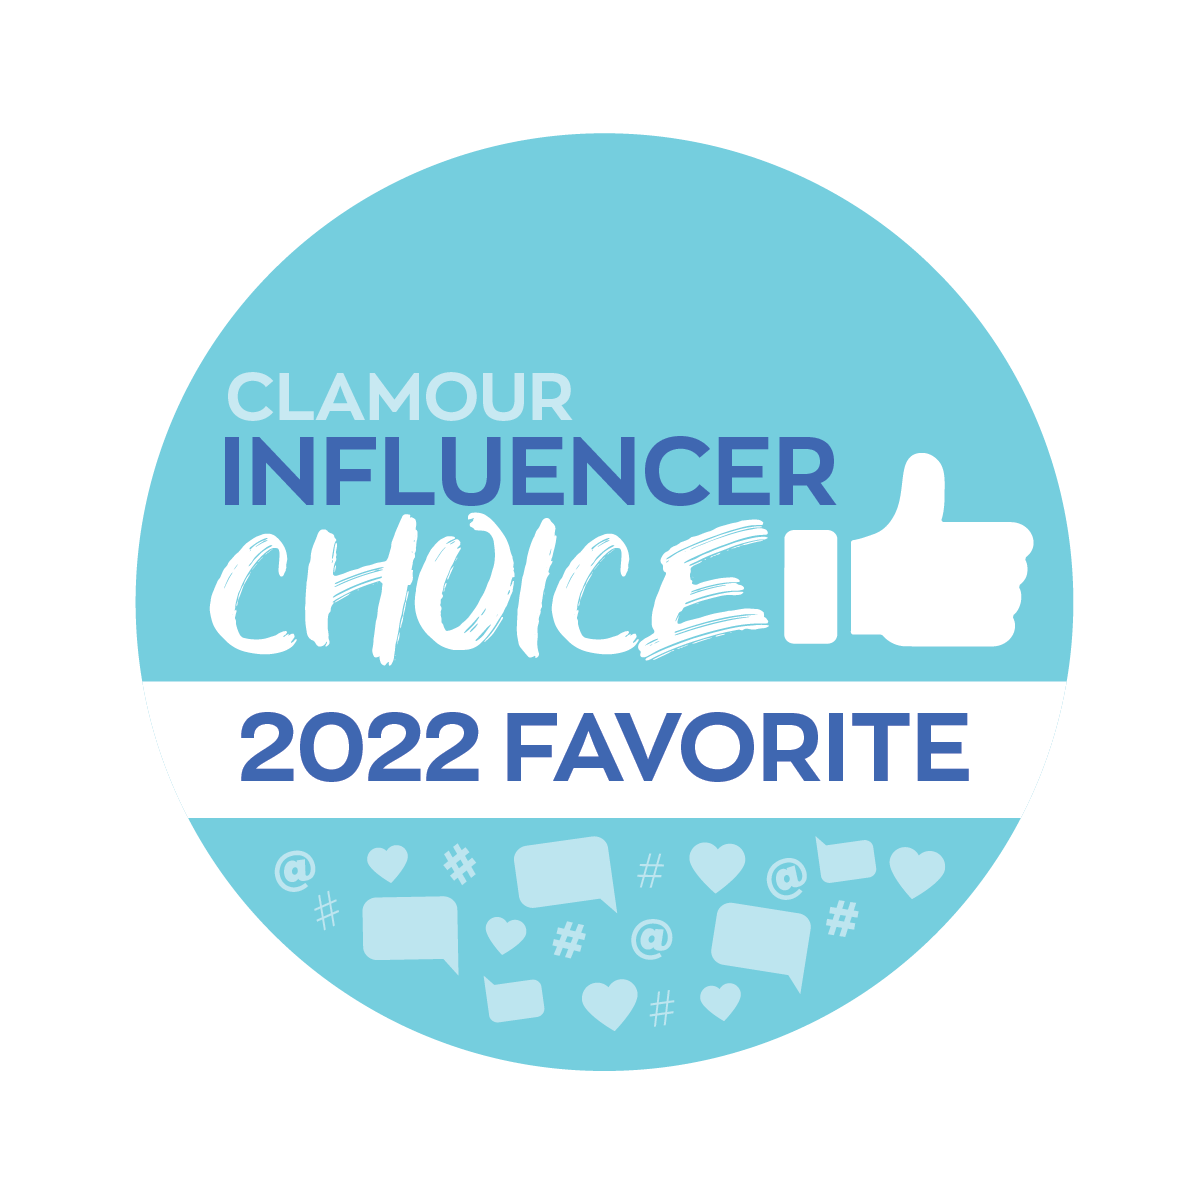 influencer-choice-favorite-2022.png